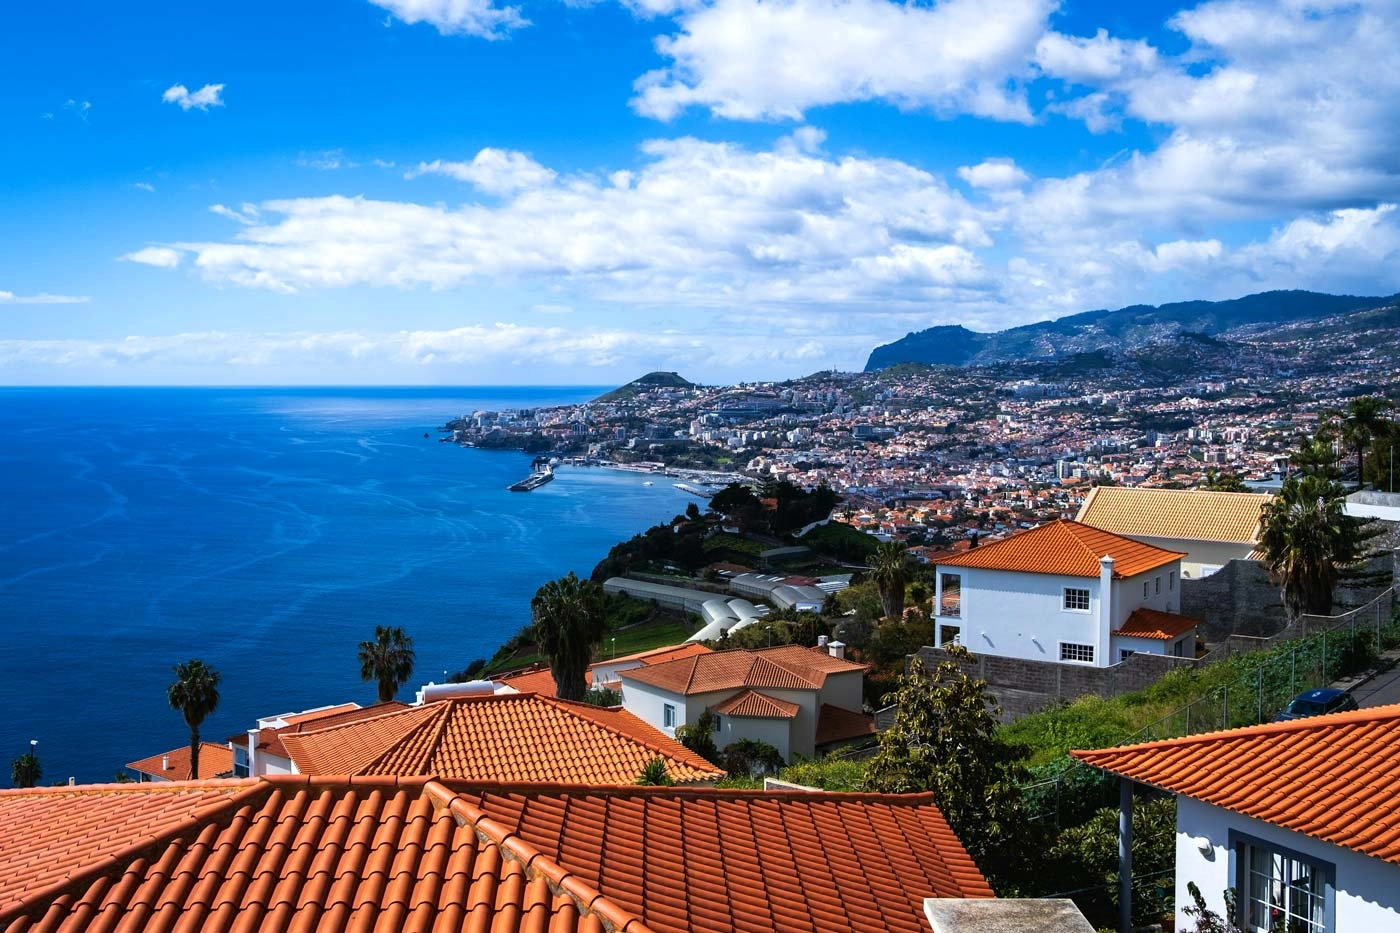 Funchal's Room Rental Availability Collapses, Defying National Trend